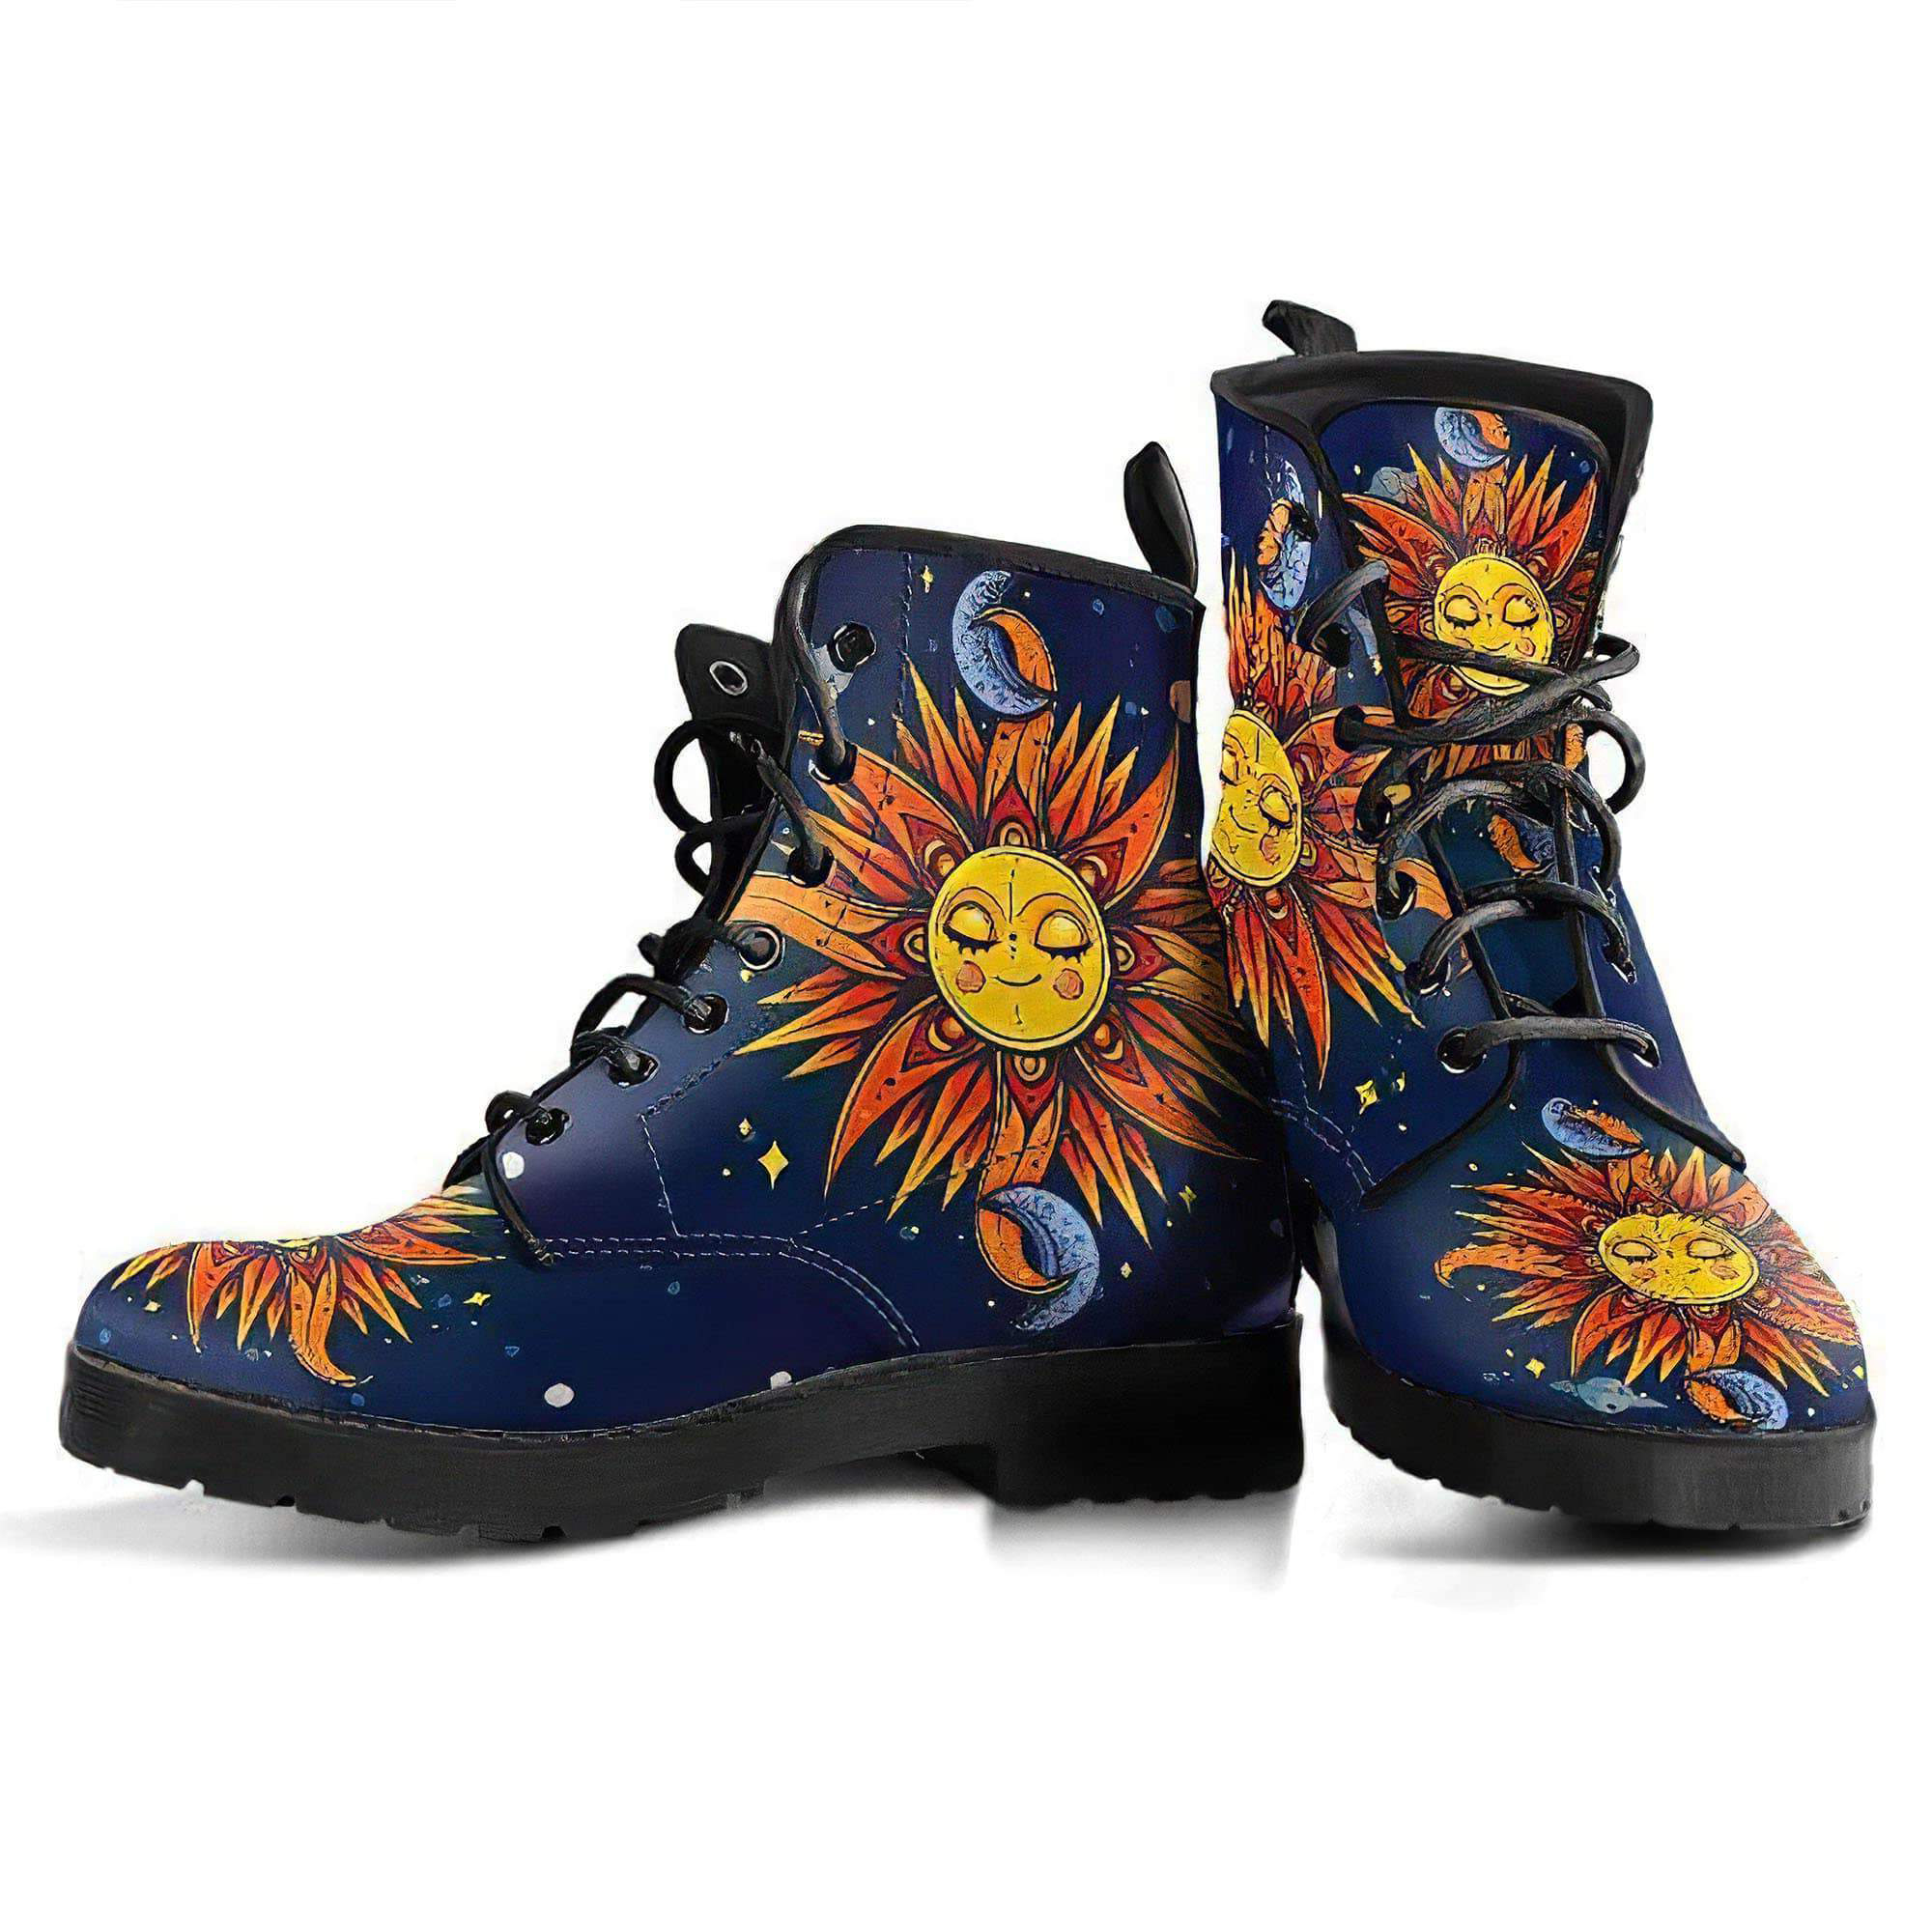 space-sun-moon-women-s-leather-boots-women-s-leather-boots-12051951255613.jpg